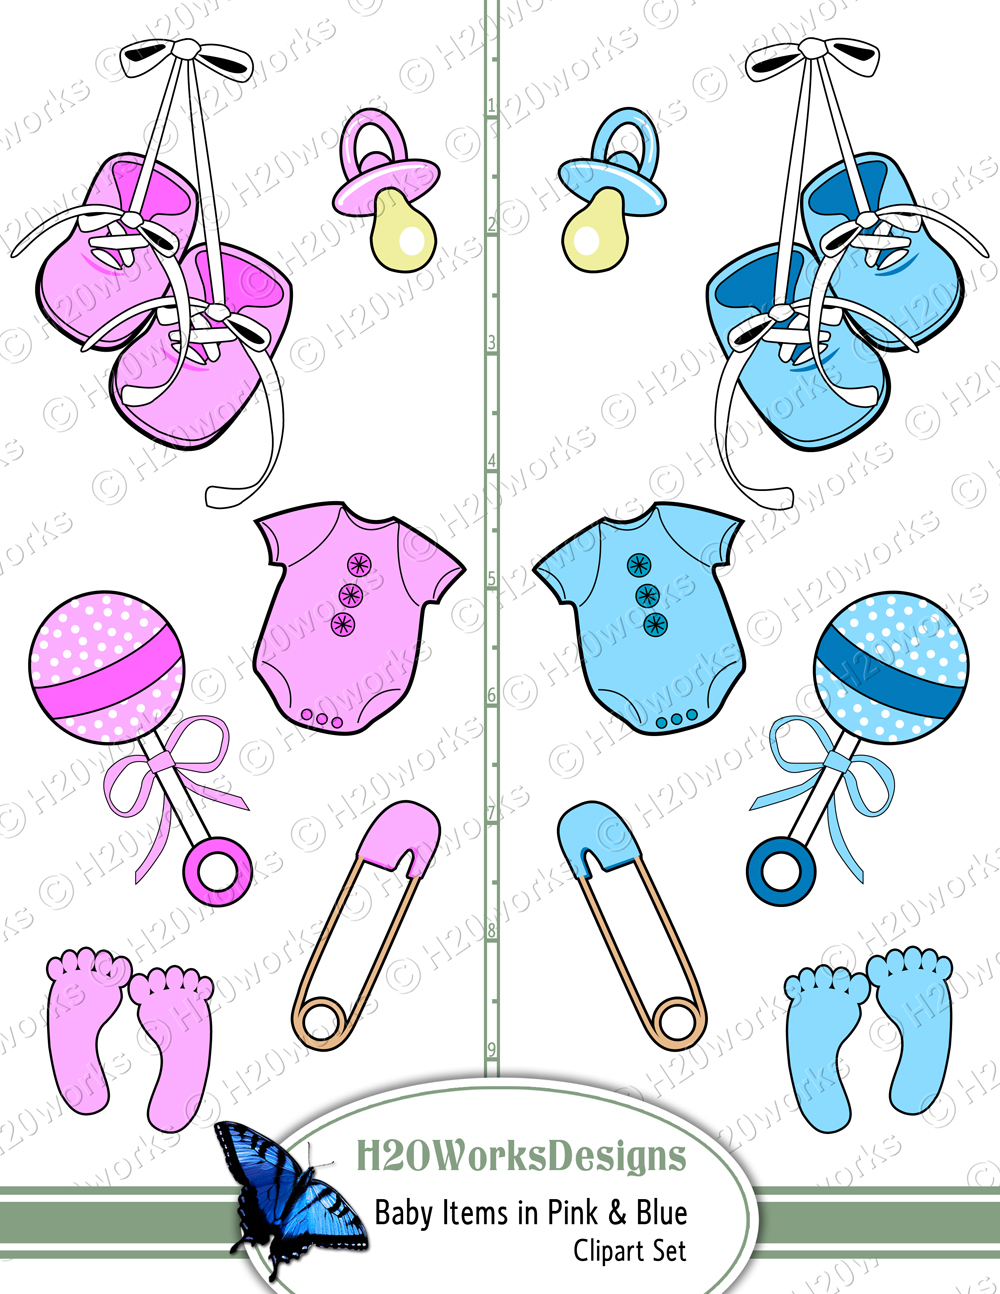 H20worksdesigns   Baby Items Clipart Set On 8 5x11 Sheet   Online    